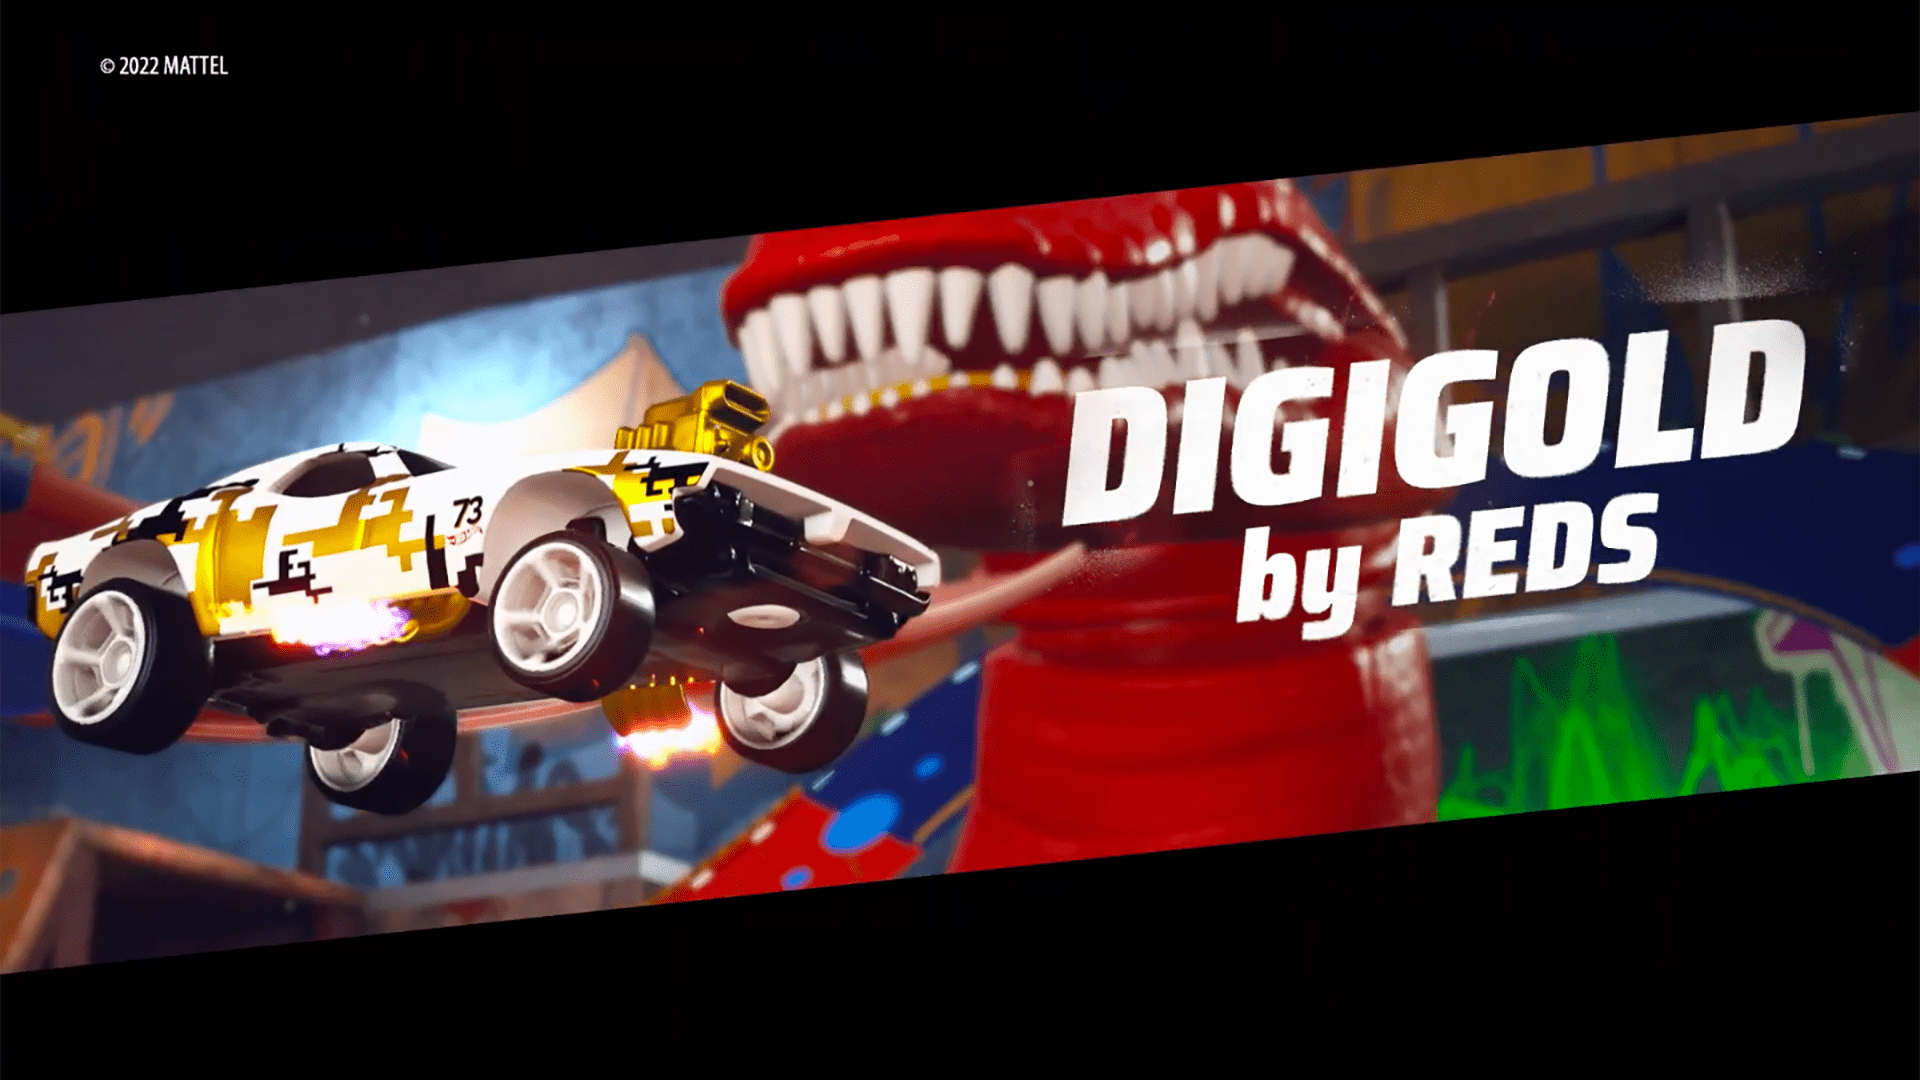 'Digigold' by 'Reds' announced as Hot Wheels Unleashed Design Battle winner